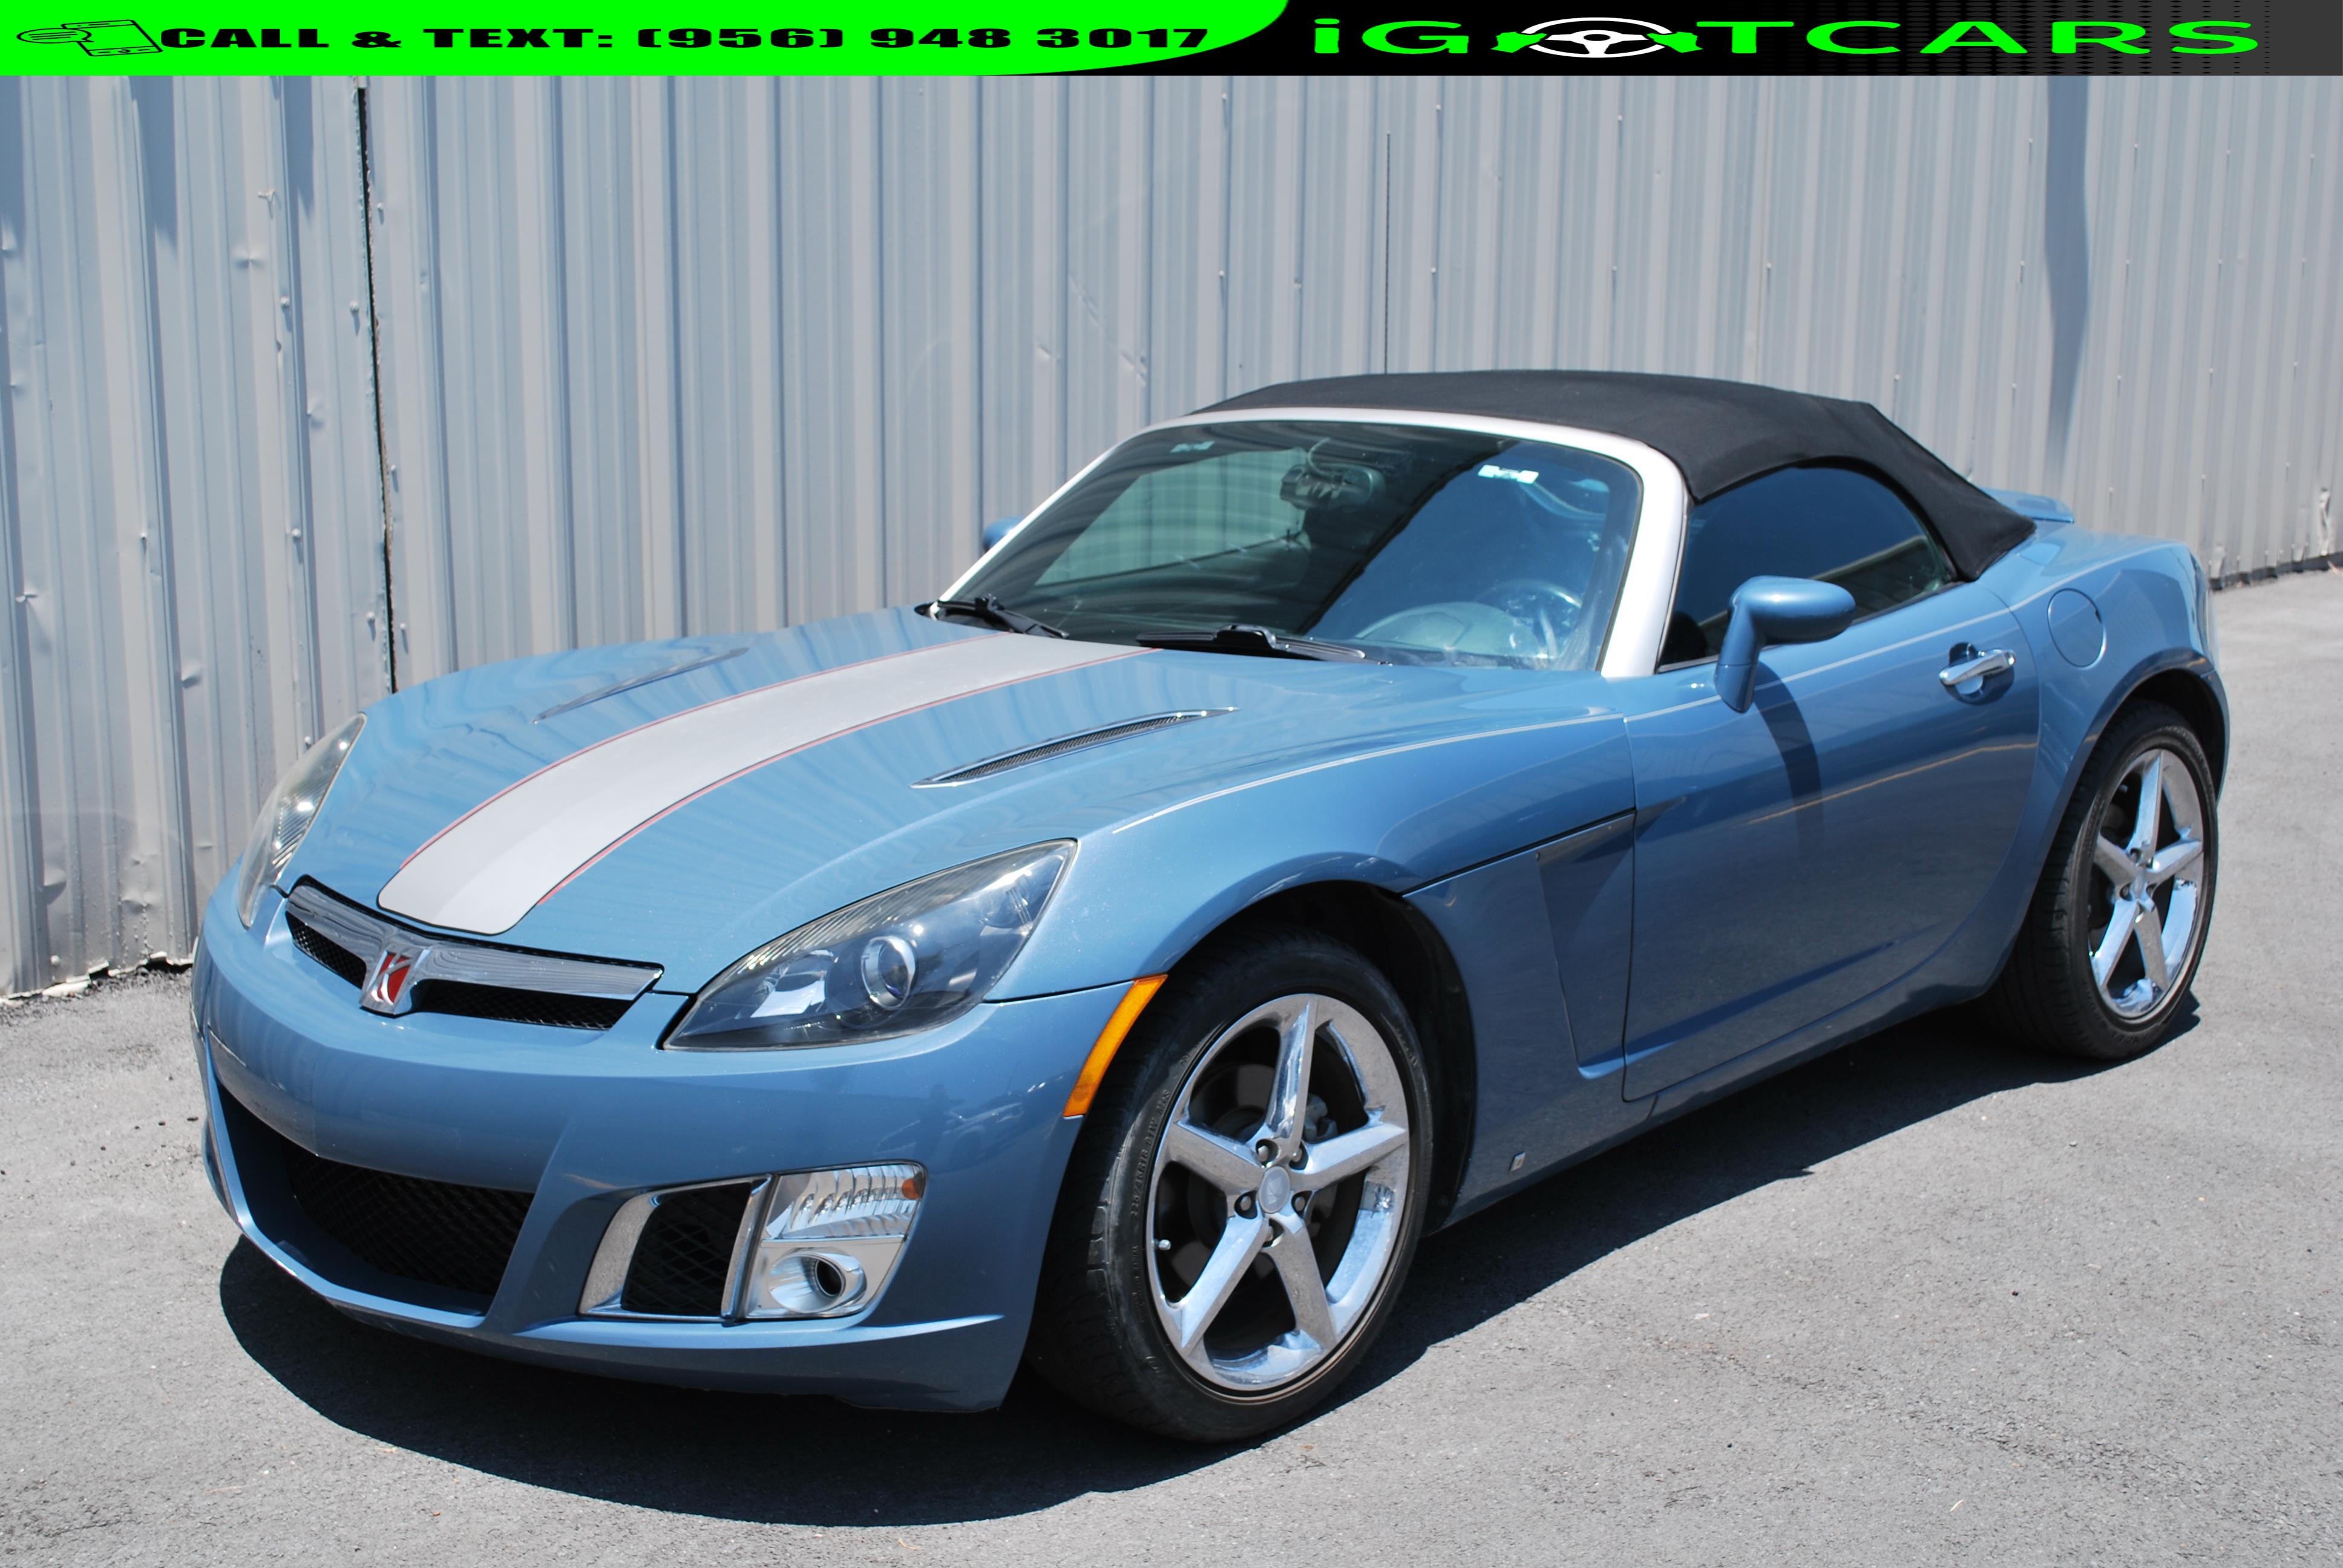 Used 2008 Saturn Sky for sale in Houston TX.  We Finance! 